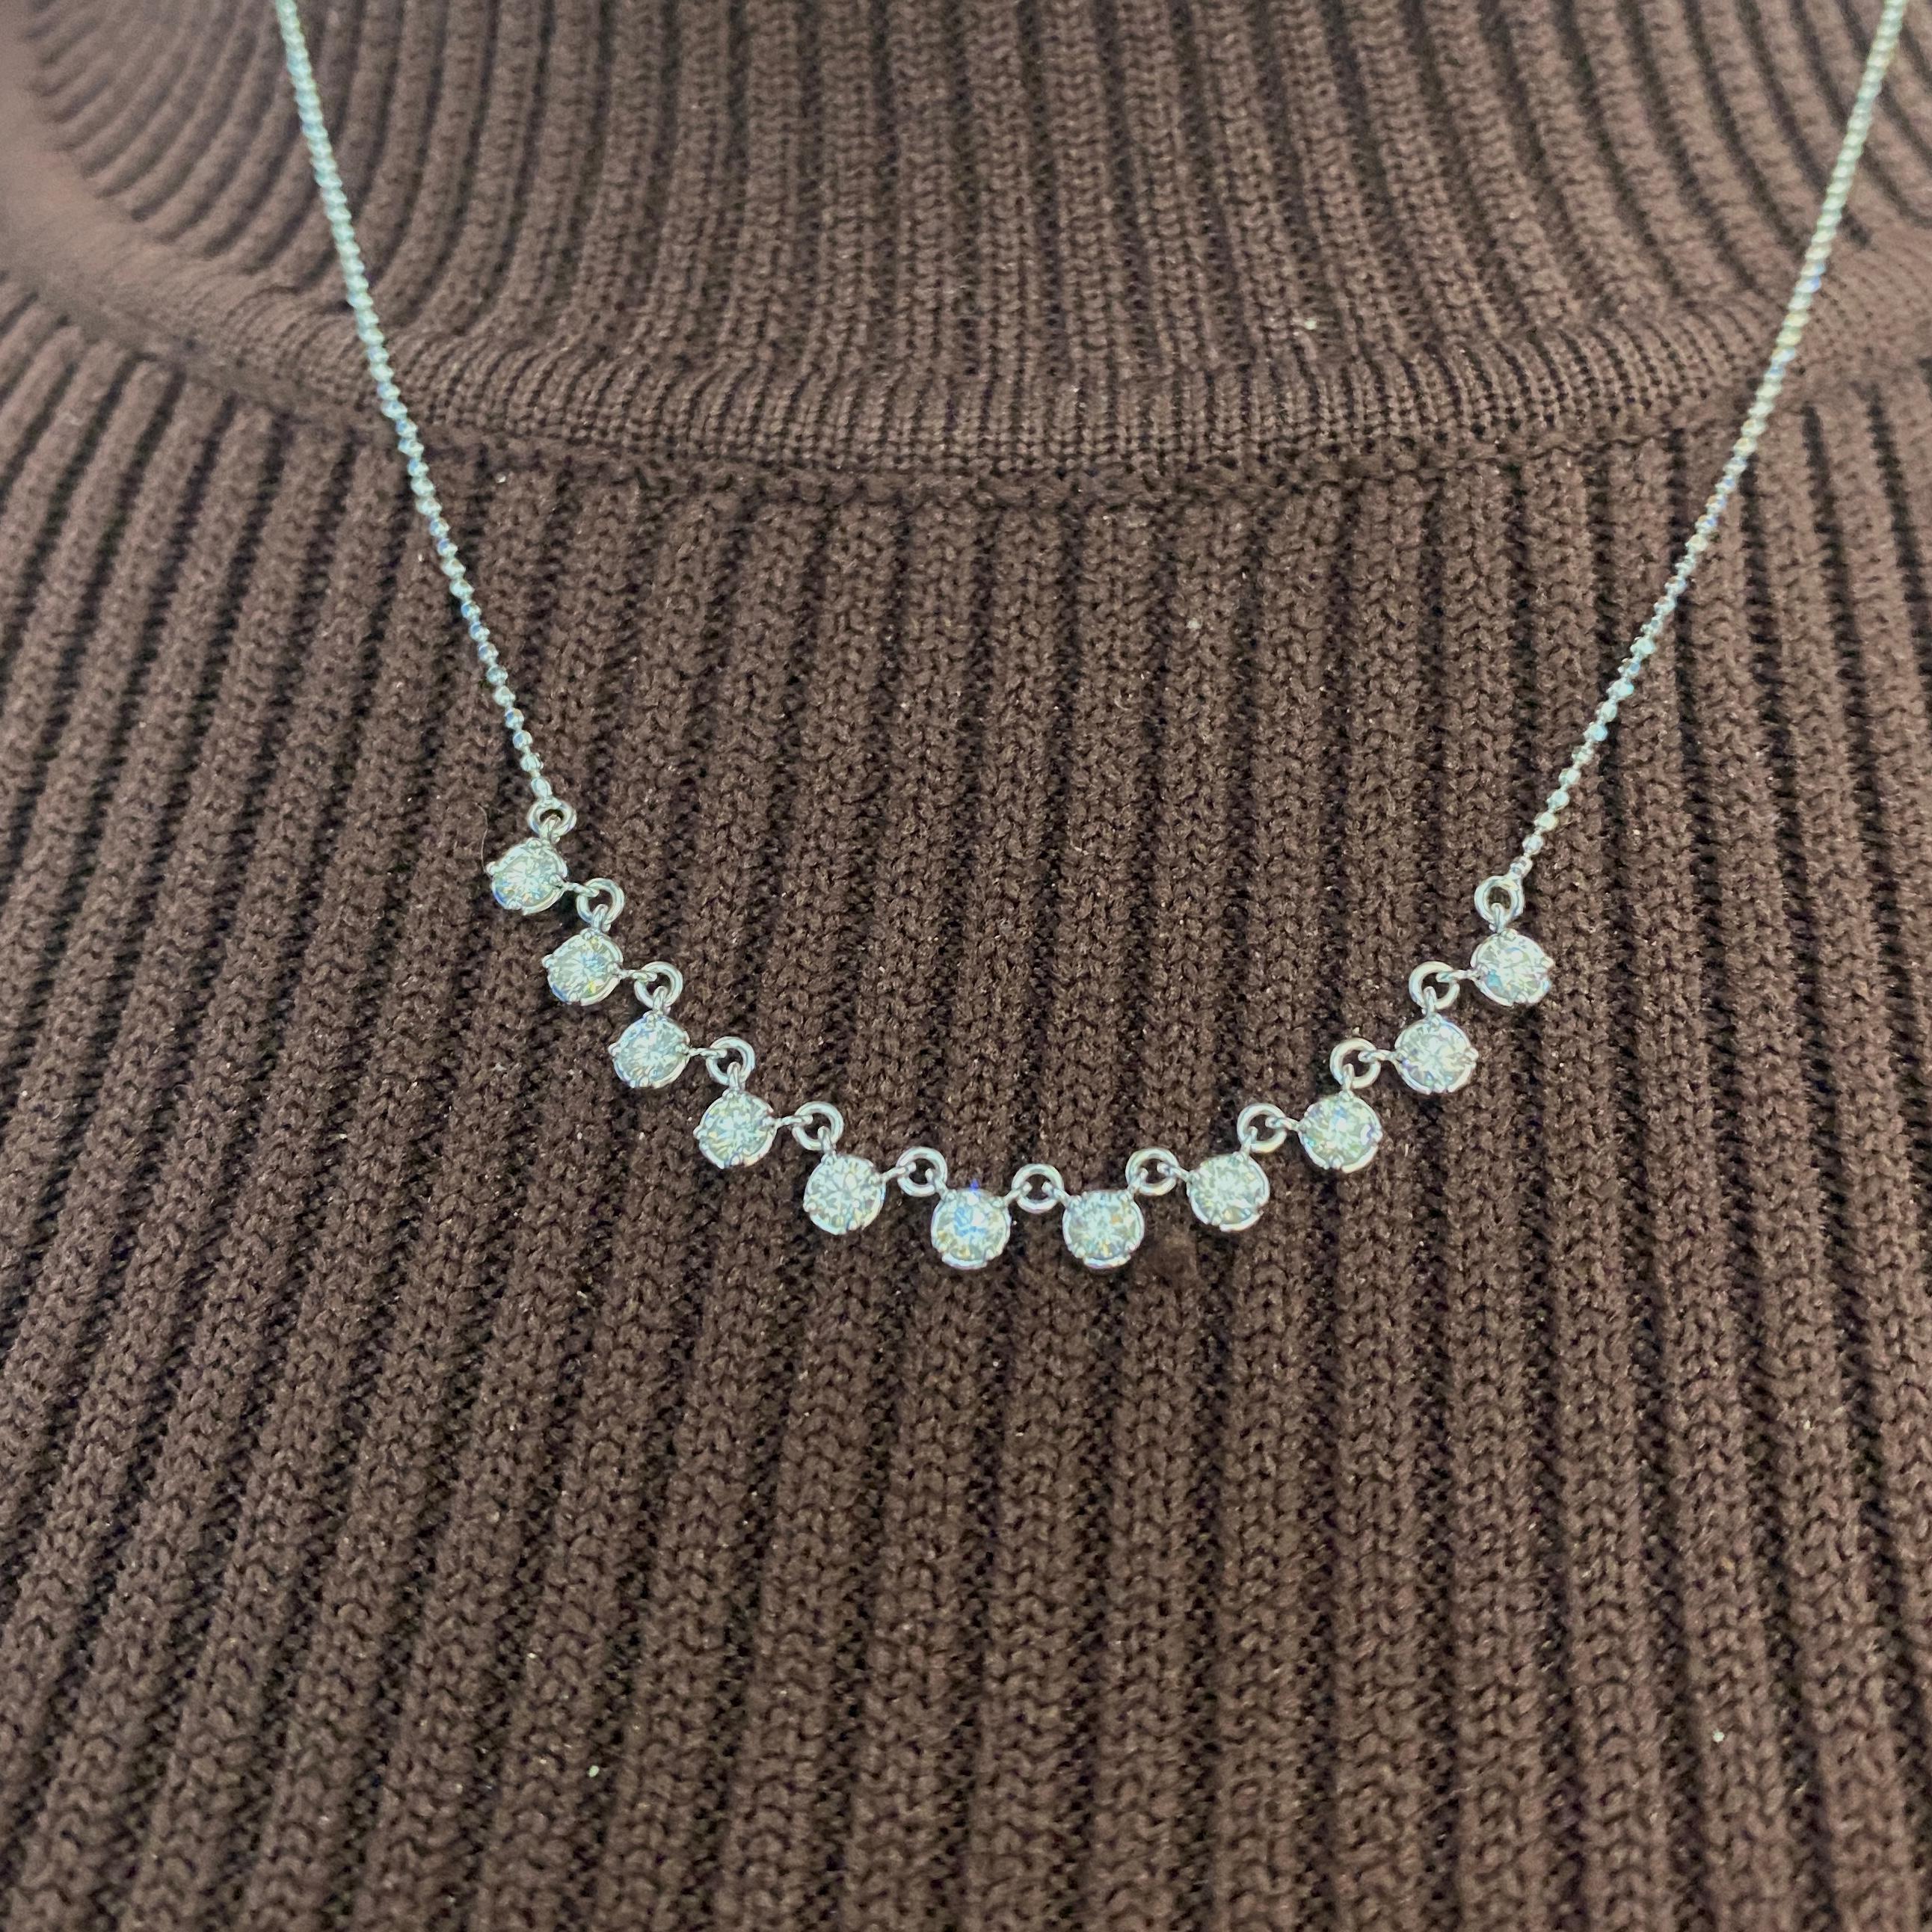 This is a fabulous contemporary diamond tennis necklace design, sure to compliment any wardrobe! Each diamond is set with four prongs on a seat that makes it look like a bezel set diamond. These diamonds sparkle brilliantly in their seats and make